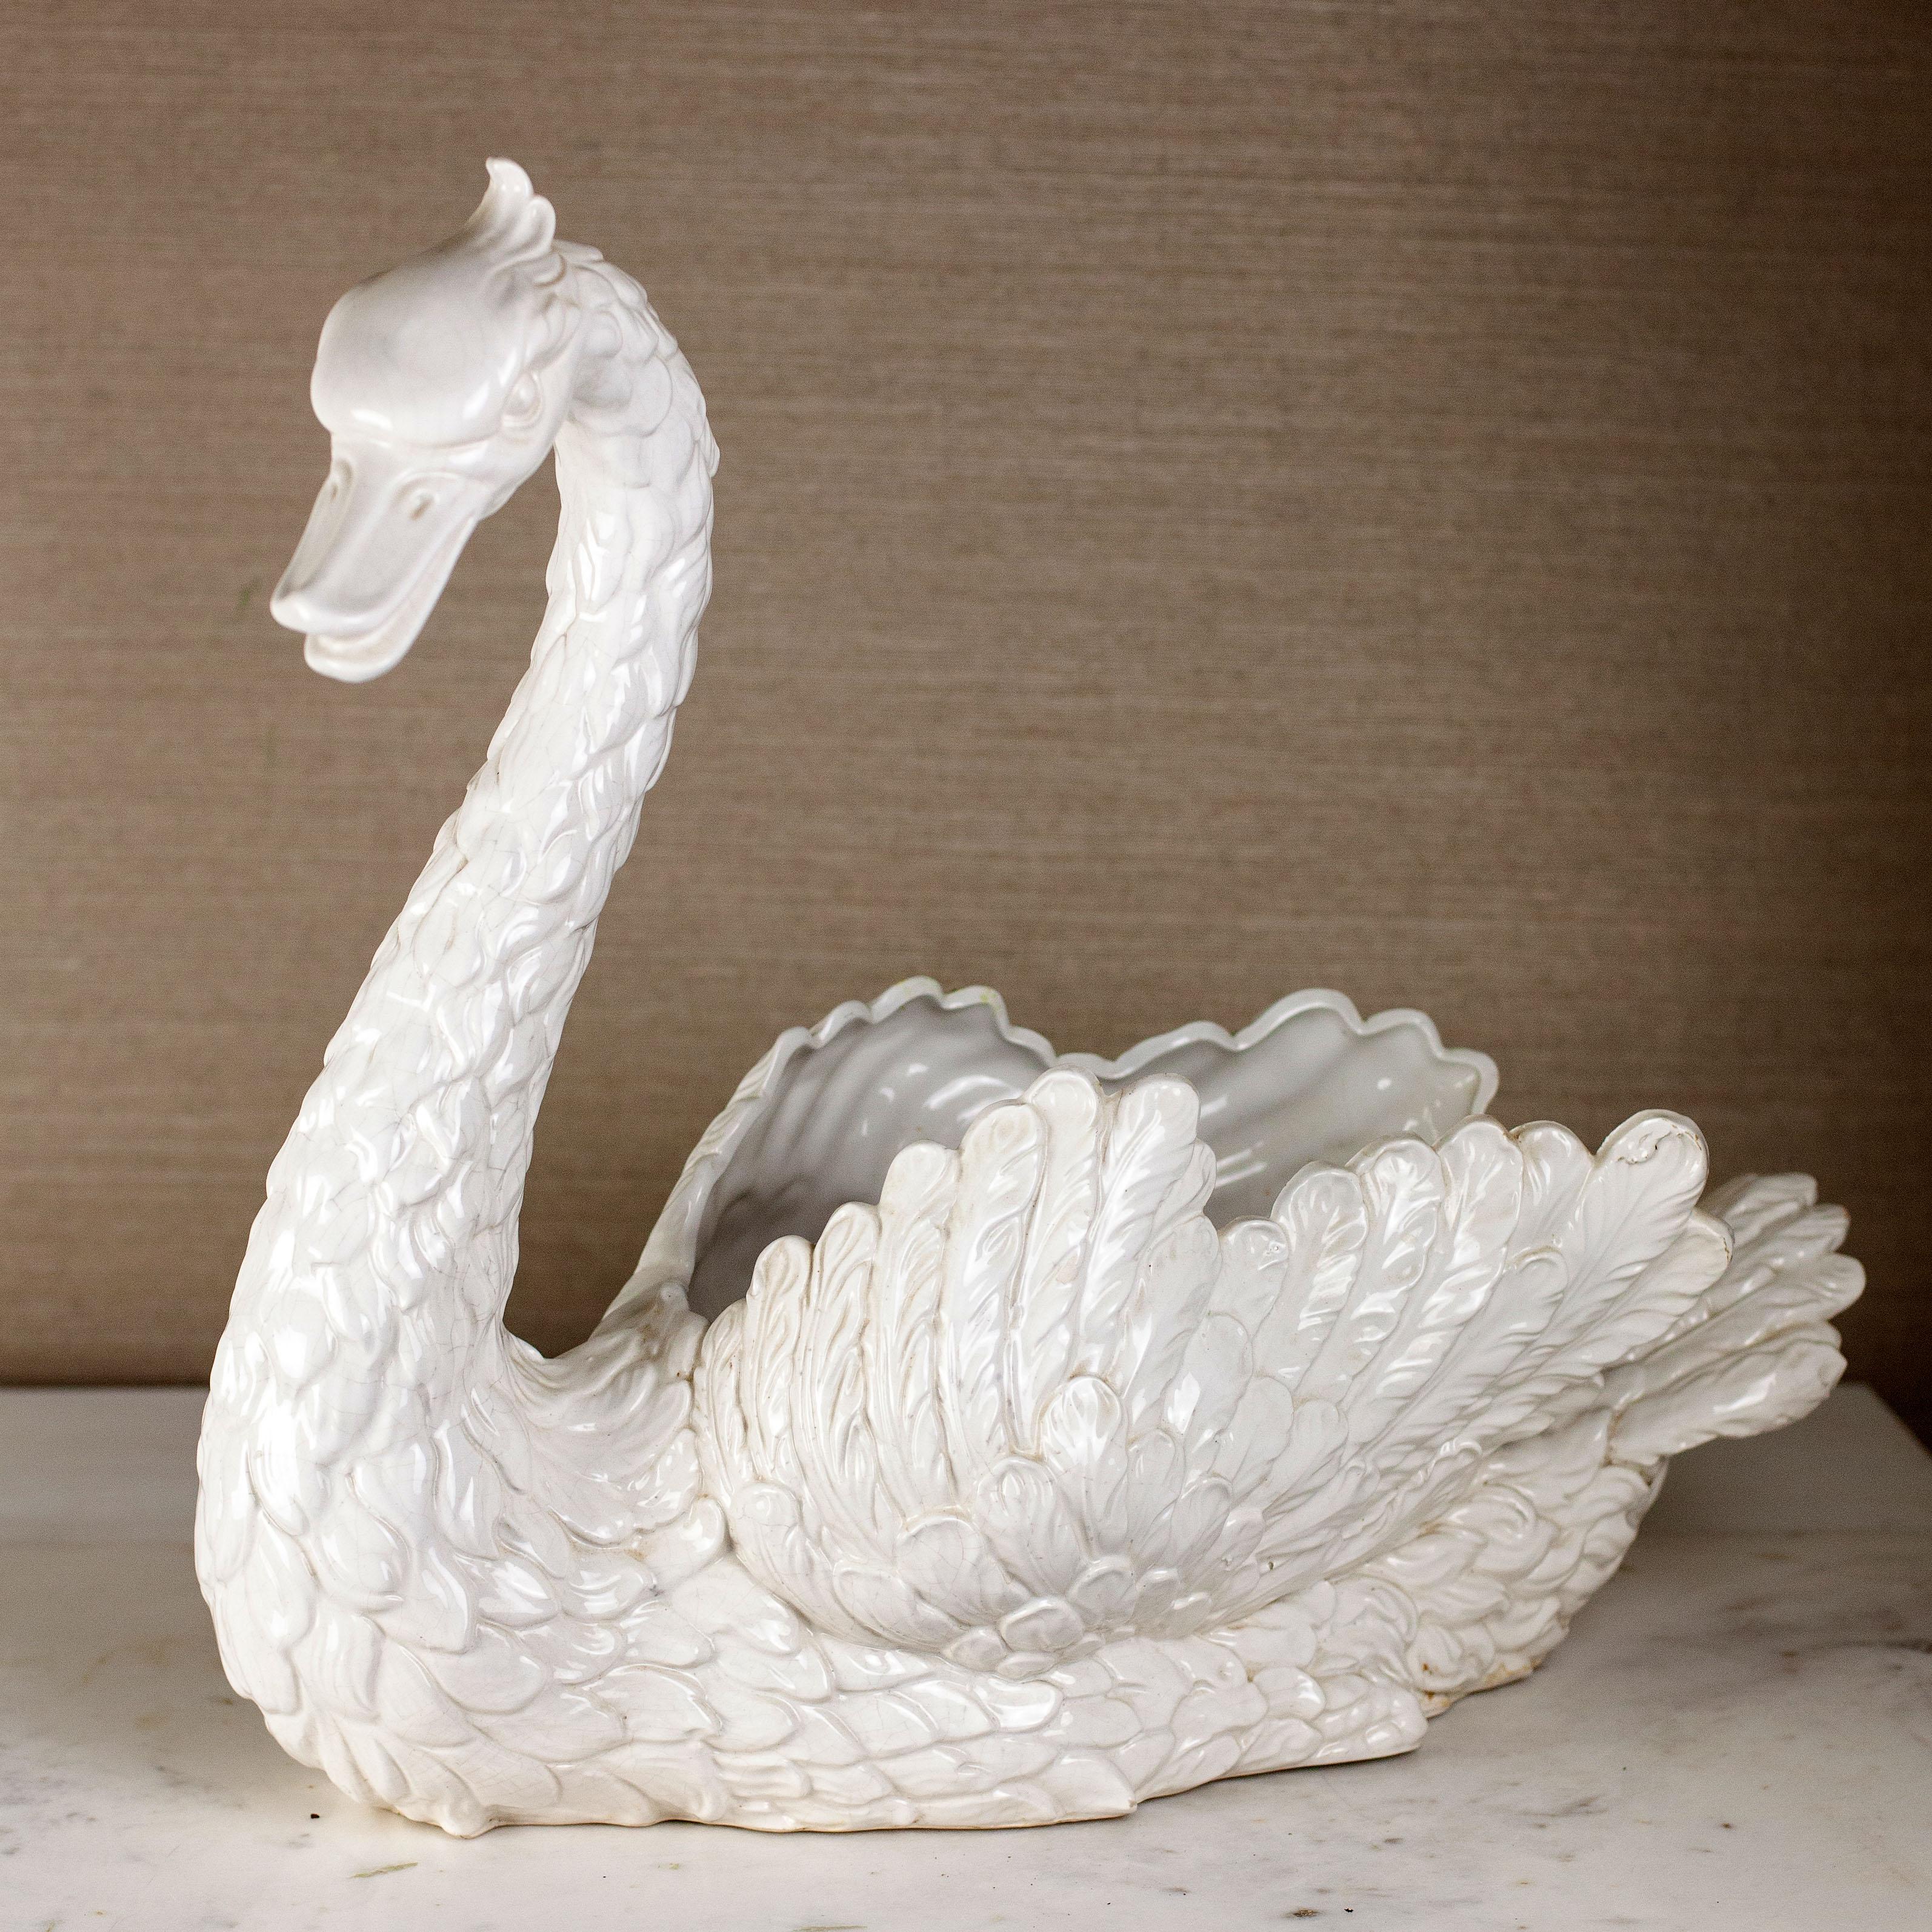 We presents for your consideration, this trumpeting cob. This male swan from the Italian designers of the mid-century will add majesty to any dining room table. Filled with a floral celebration or mixed fruits, this centerpiece will surely delight